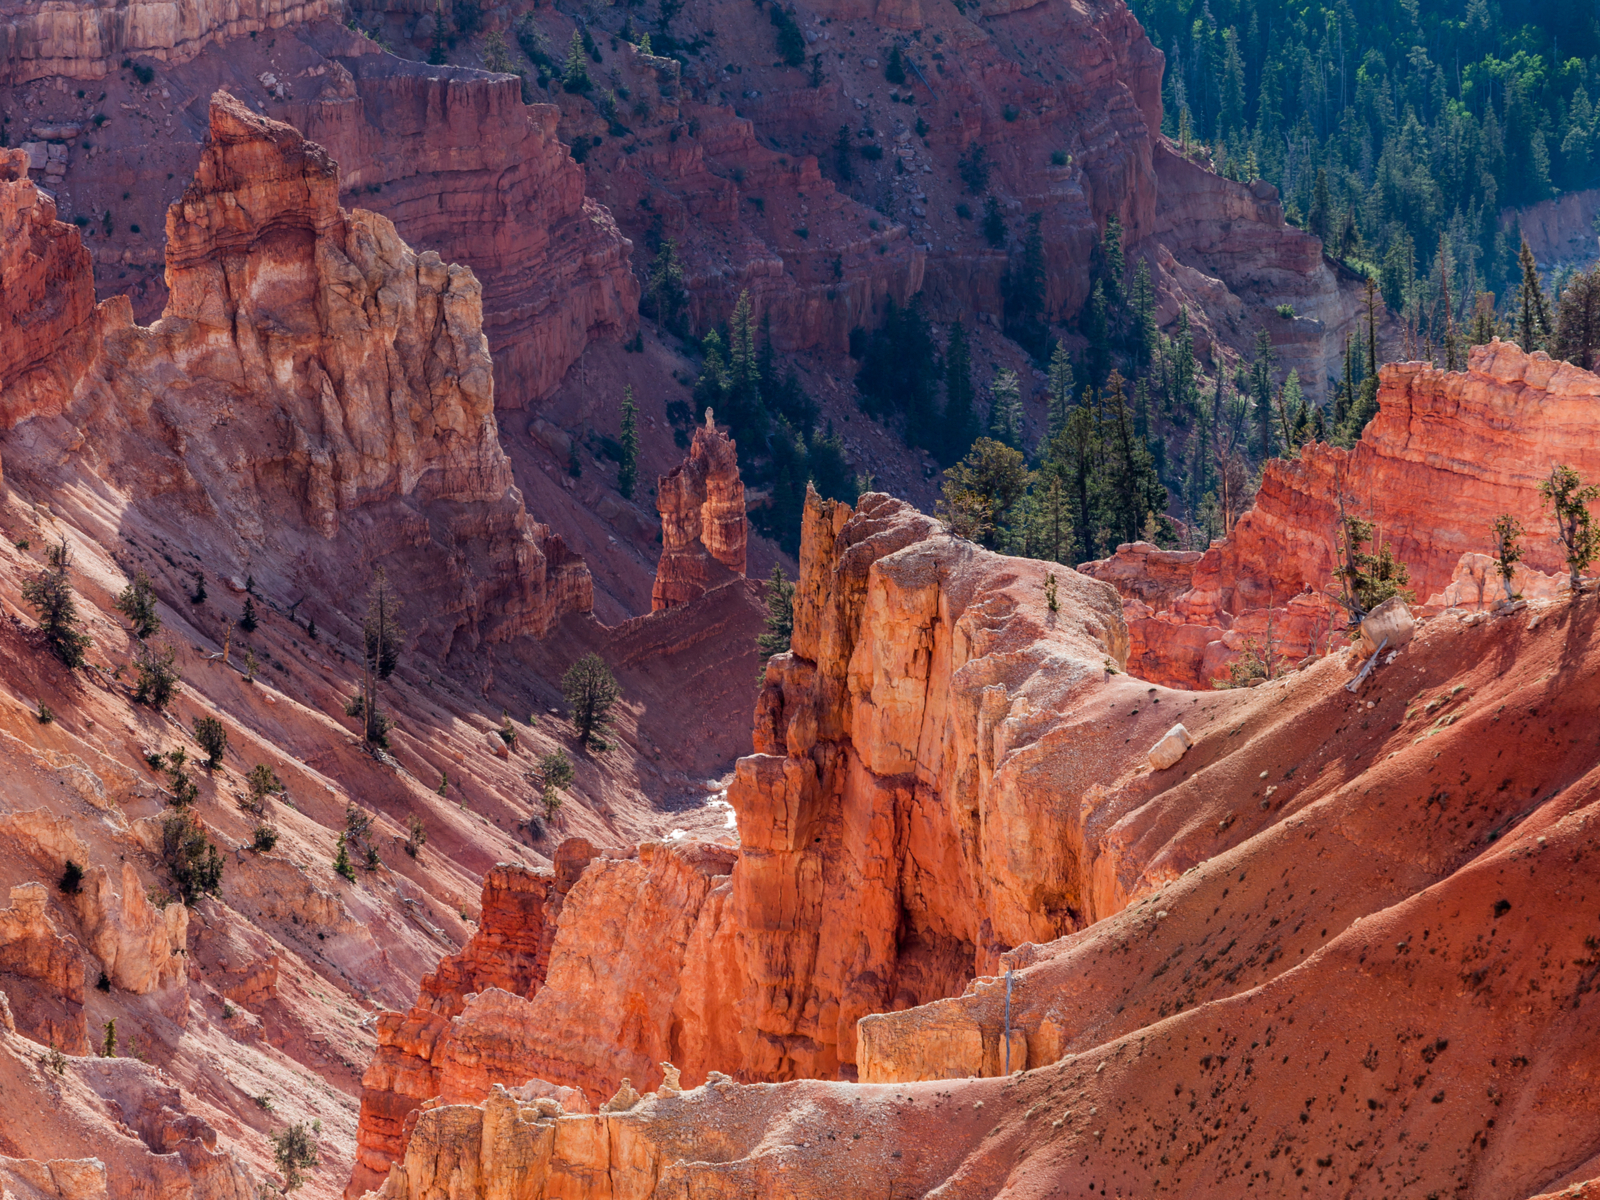 Cedar Breaks national monument, one of the best places to visit in Utah, as seen from the canyon rim